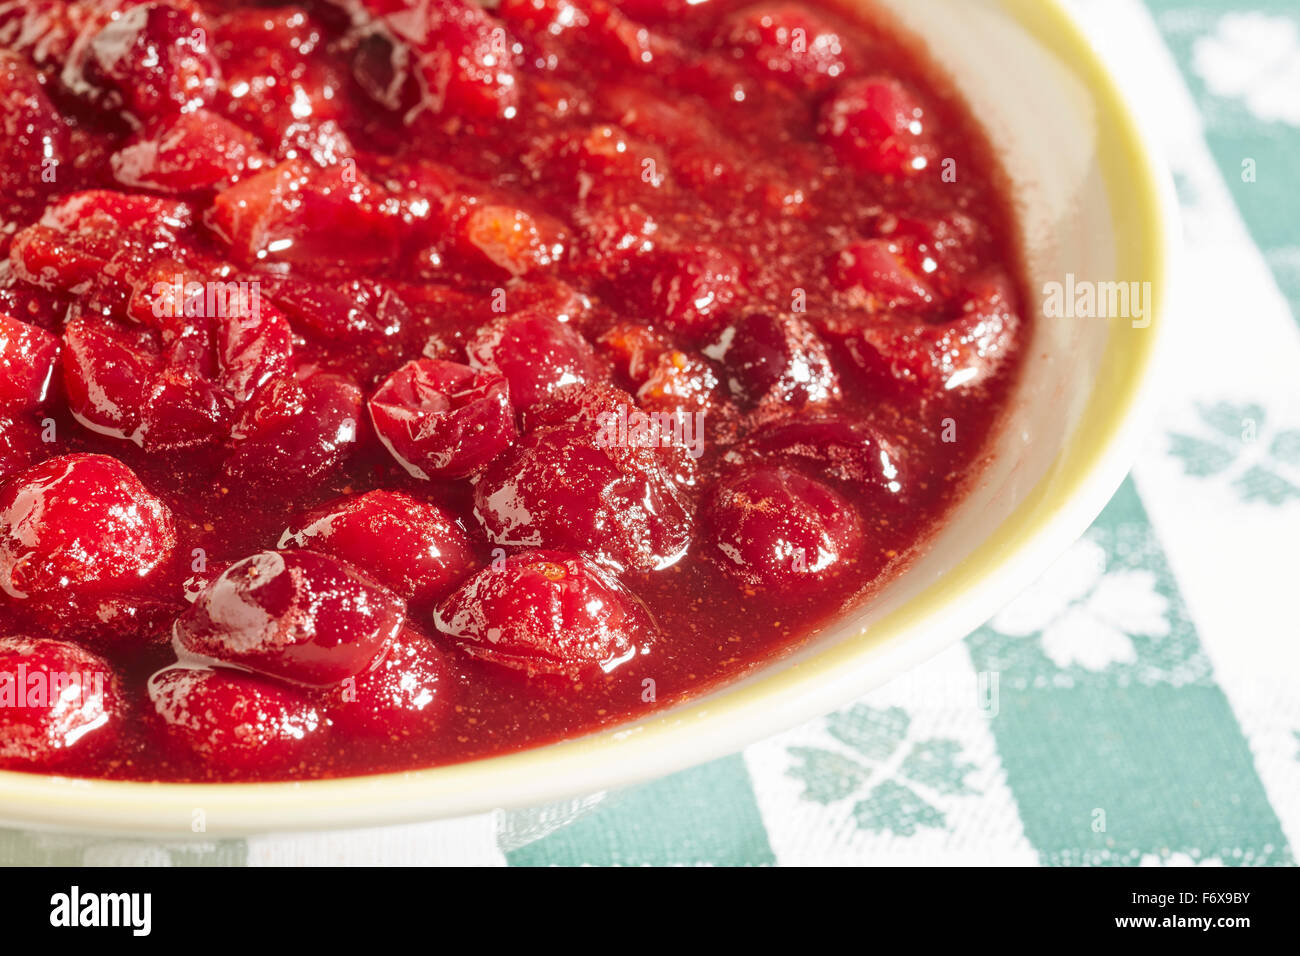 whole berry cranberry sauce Stock Photo